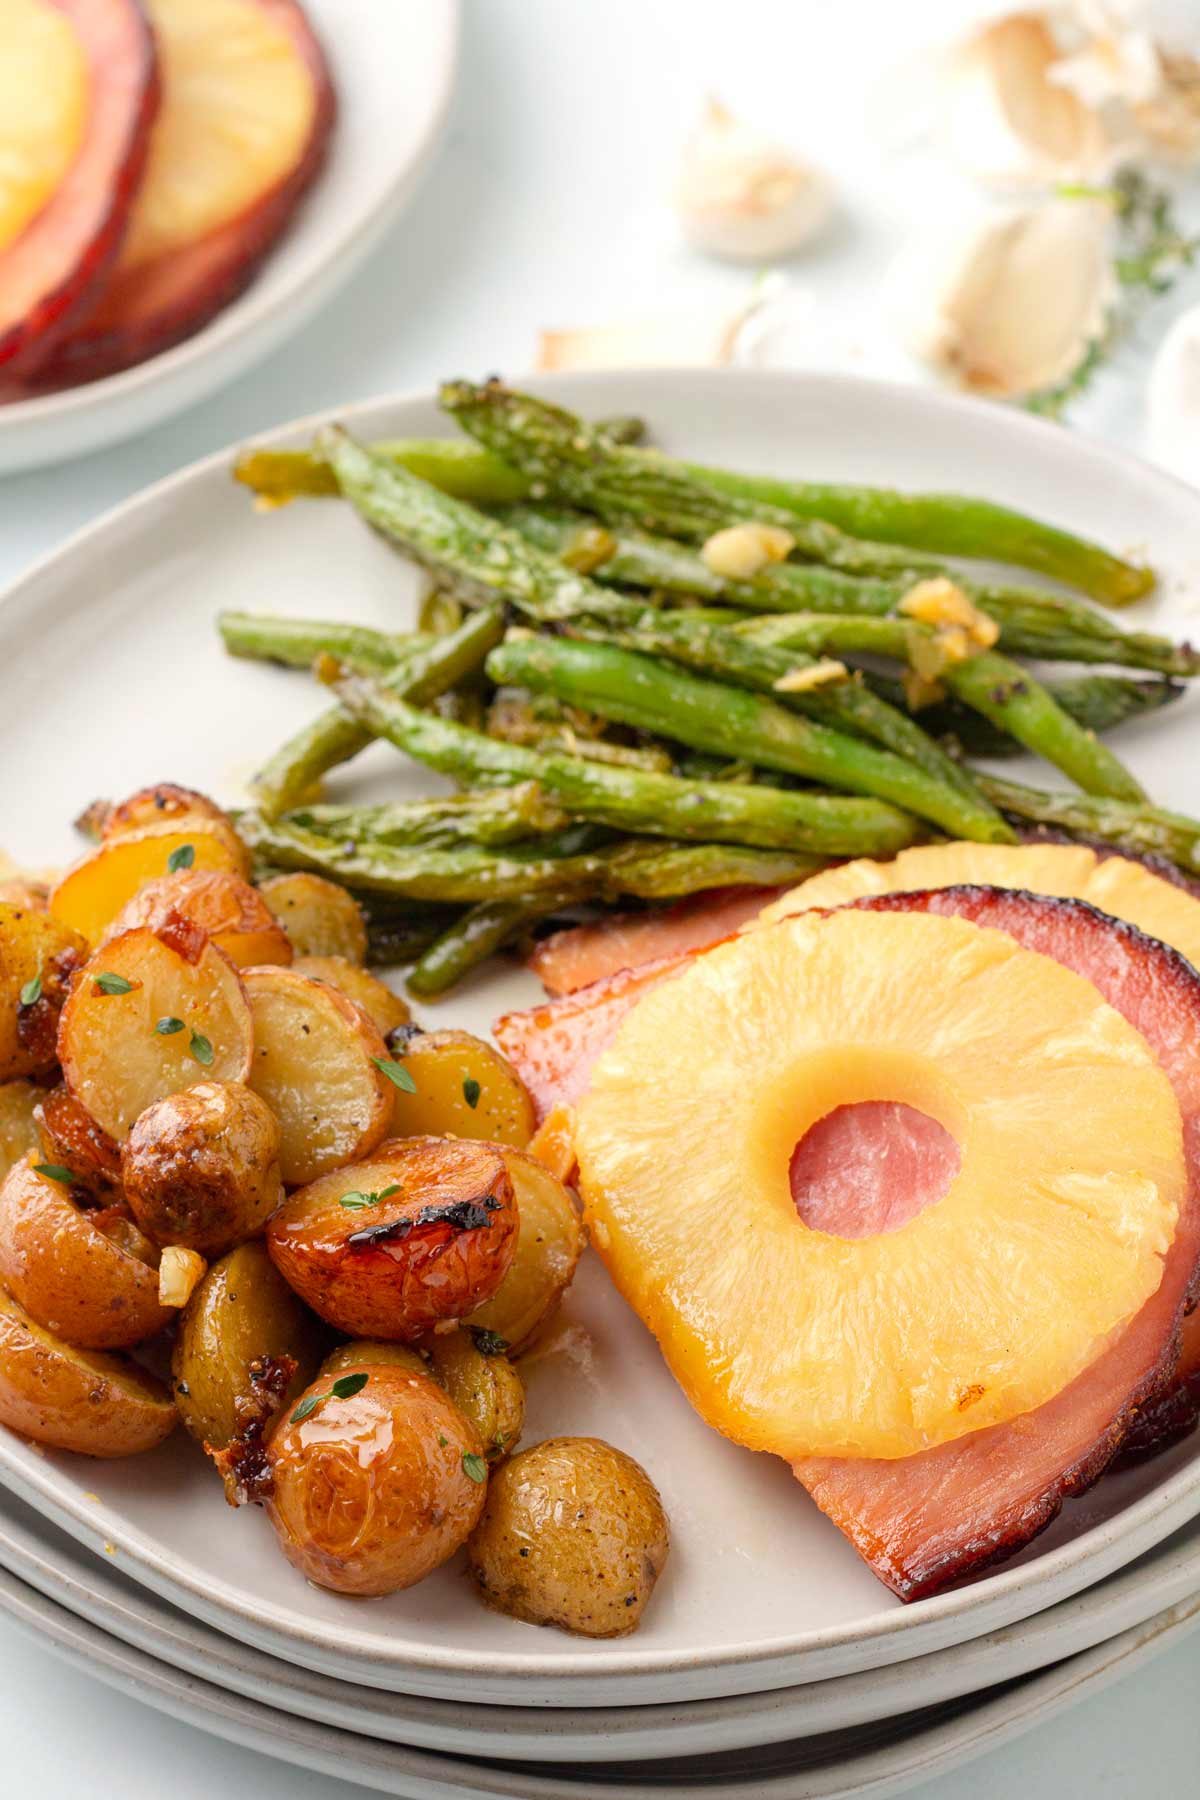 potatoes, green beans, and pineapple ham on plate.